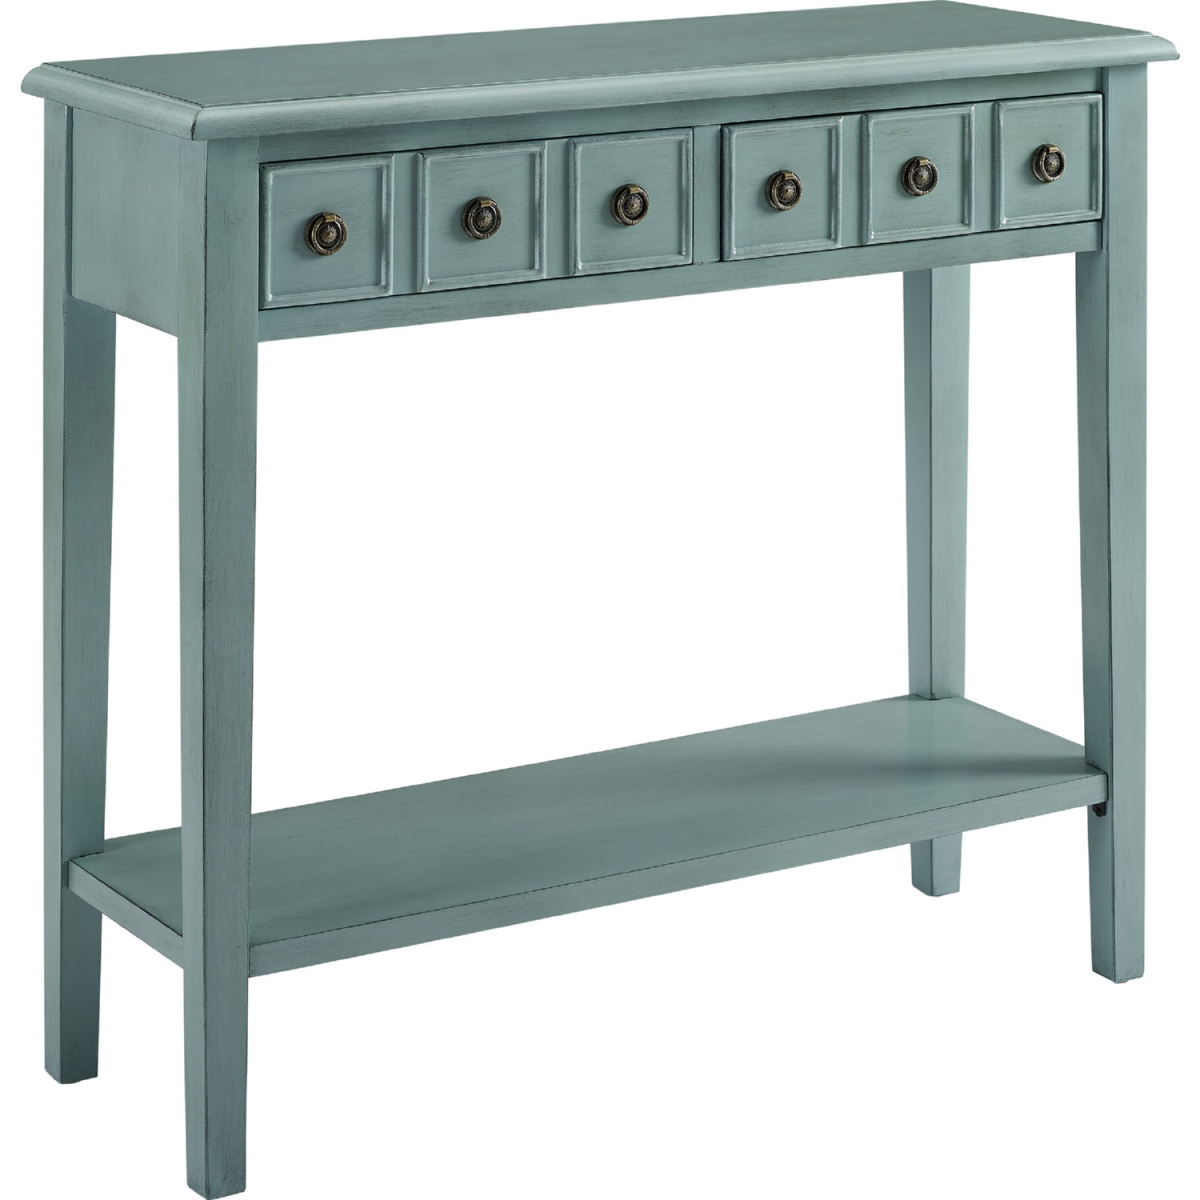 D1312a19t 38 In. Sadie Console Table, Teal